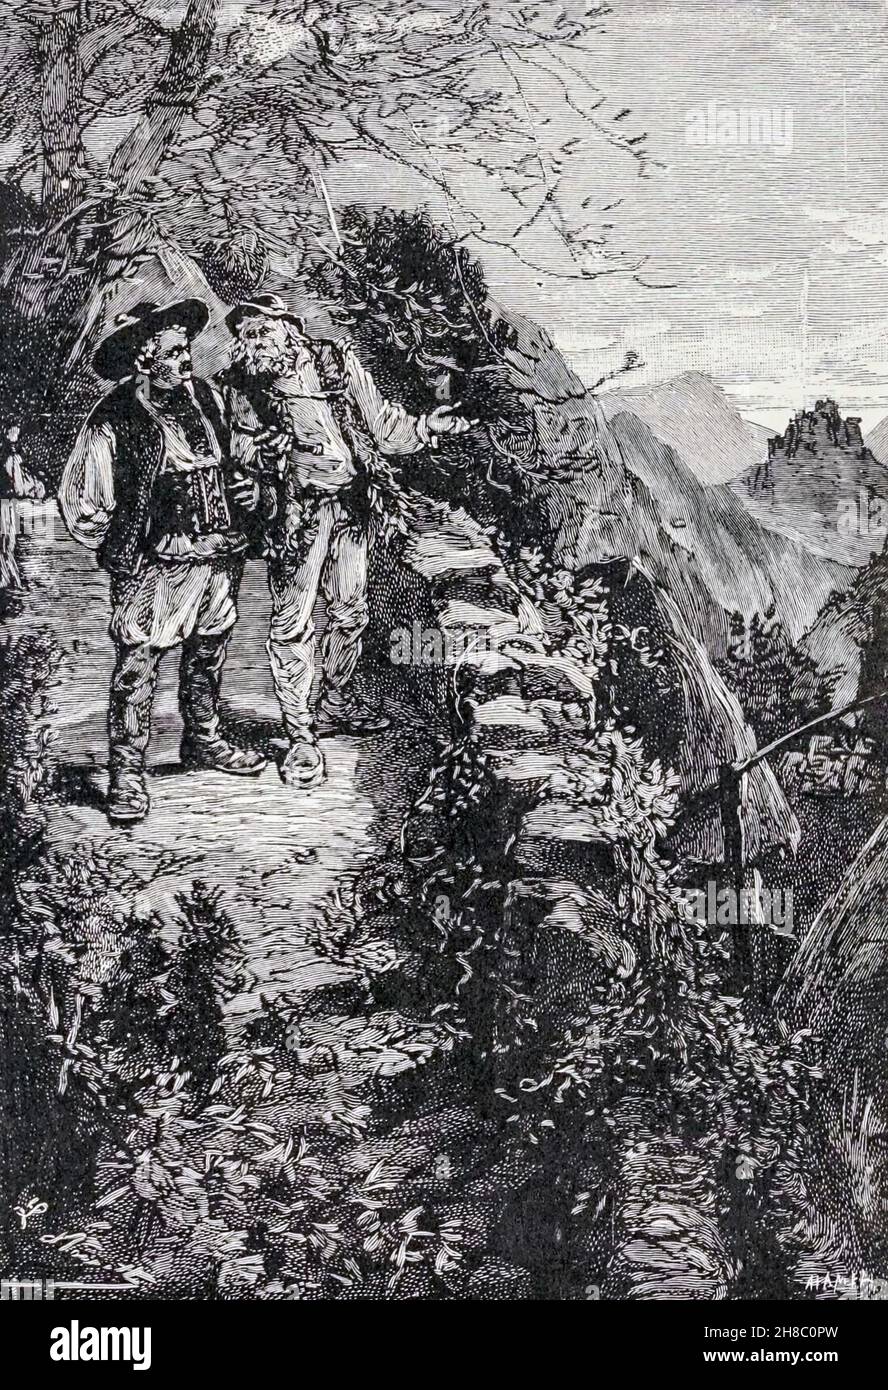 Frik held out the telescope to Master Koltz from ' The Carpathian Castle ' (or The castle of the Carpathians) by Jules, Verne, 1828-1905. May have been the inspiration for Dracula, Published in New York, by Merriam in 1894 In the village of Werst in the Carpathian mountains of Transylvania, some mysterious things are occurring and the villagers believe that Chort (the devil) occupies the castle. A visitor to the region, Count Franz de Telek, is intrigued by the stories and decides to go to the castle and investigate. He finds that the owner of the castle is Baron Rodolphe de Gortz, with whom h Stock Photo